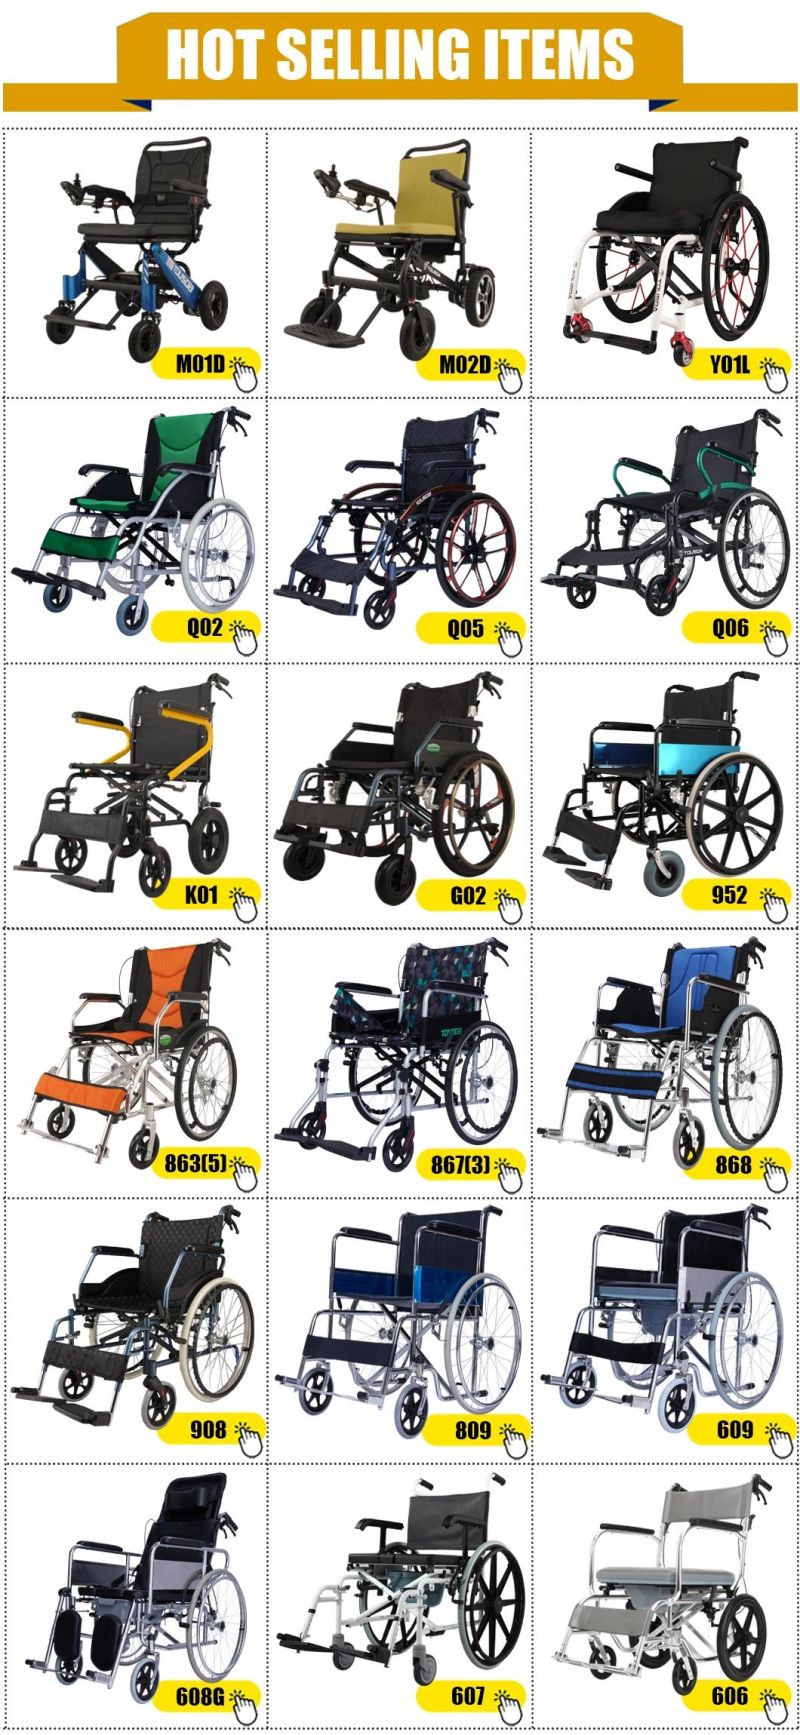 Manufacture Supply Hospital Furniture Folding Steel Manual Homecare Wheelchair with Chrome Frame Cheap Price